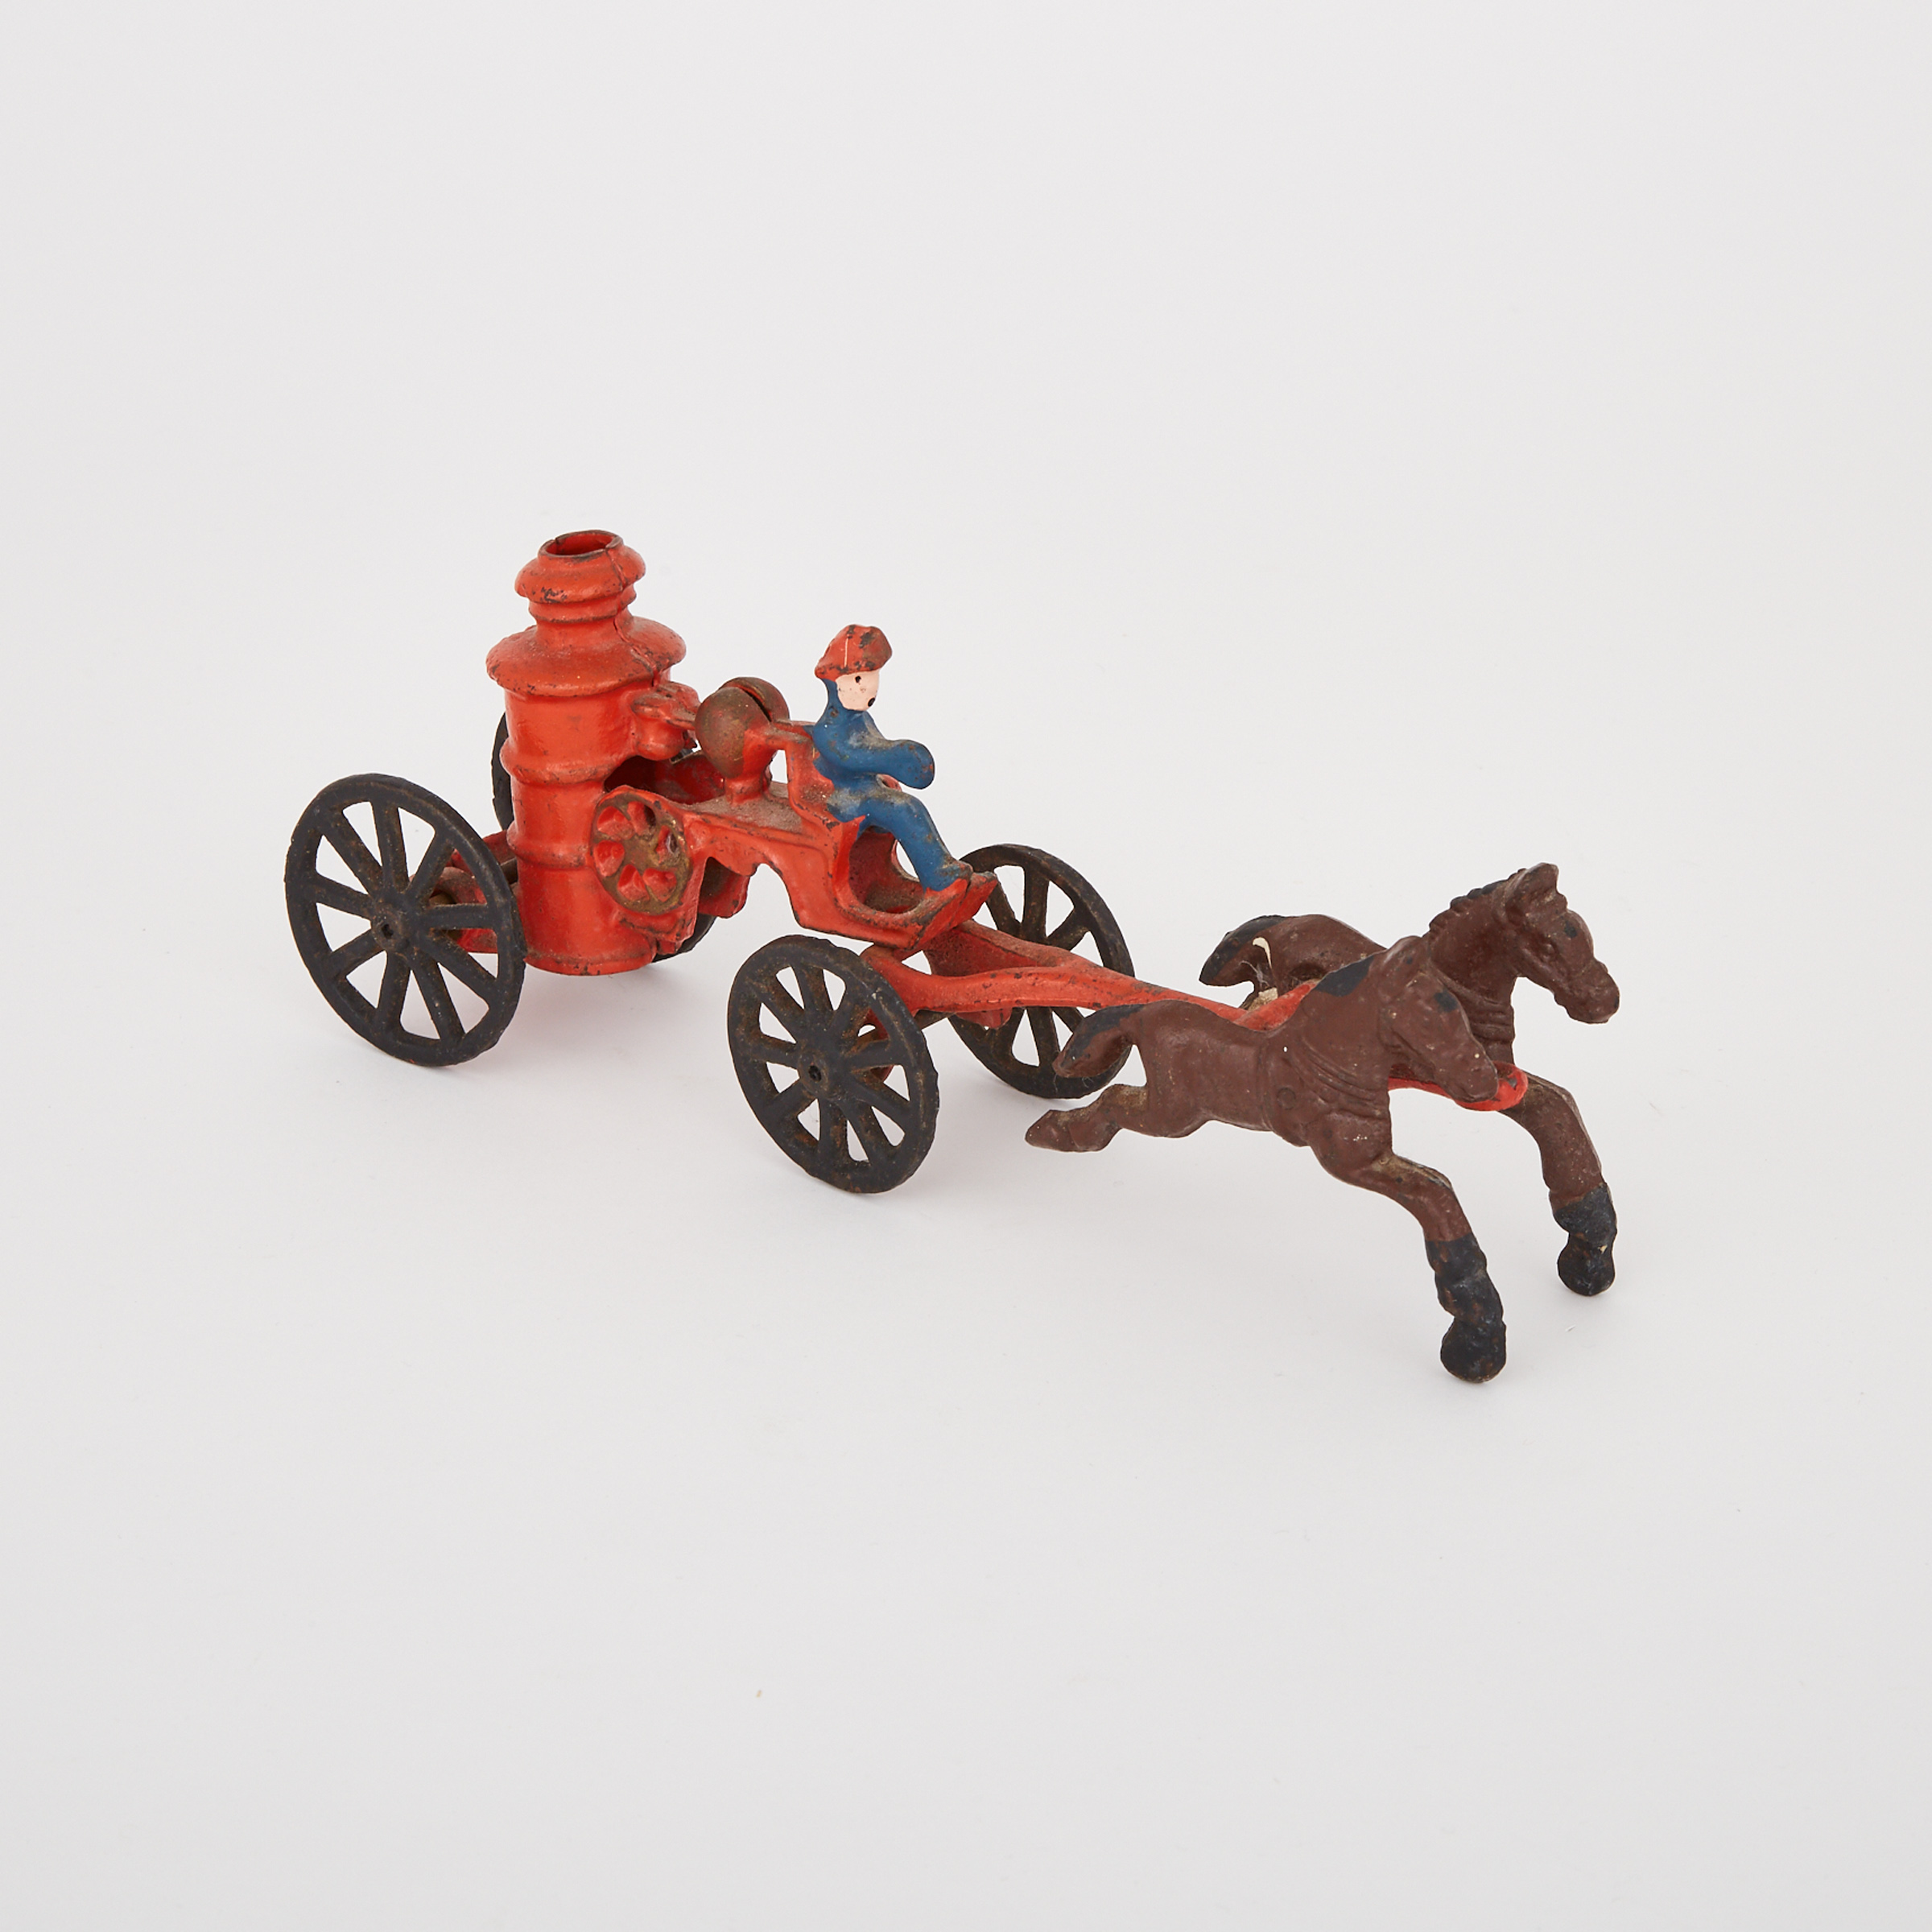 Reproduction Painted Cast Iron Horse Drawn Fire Engine Toy, 20th century